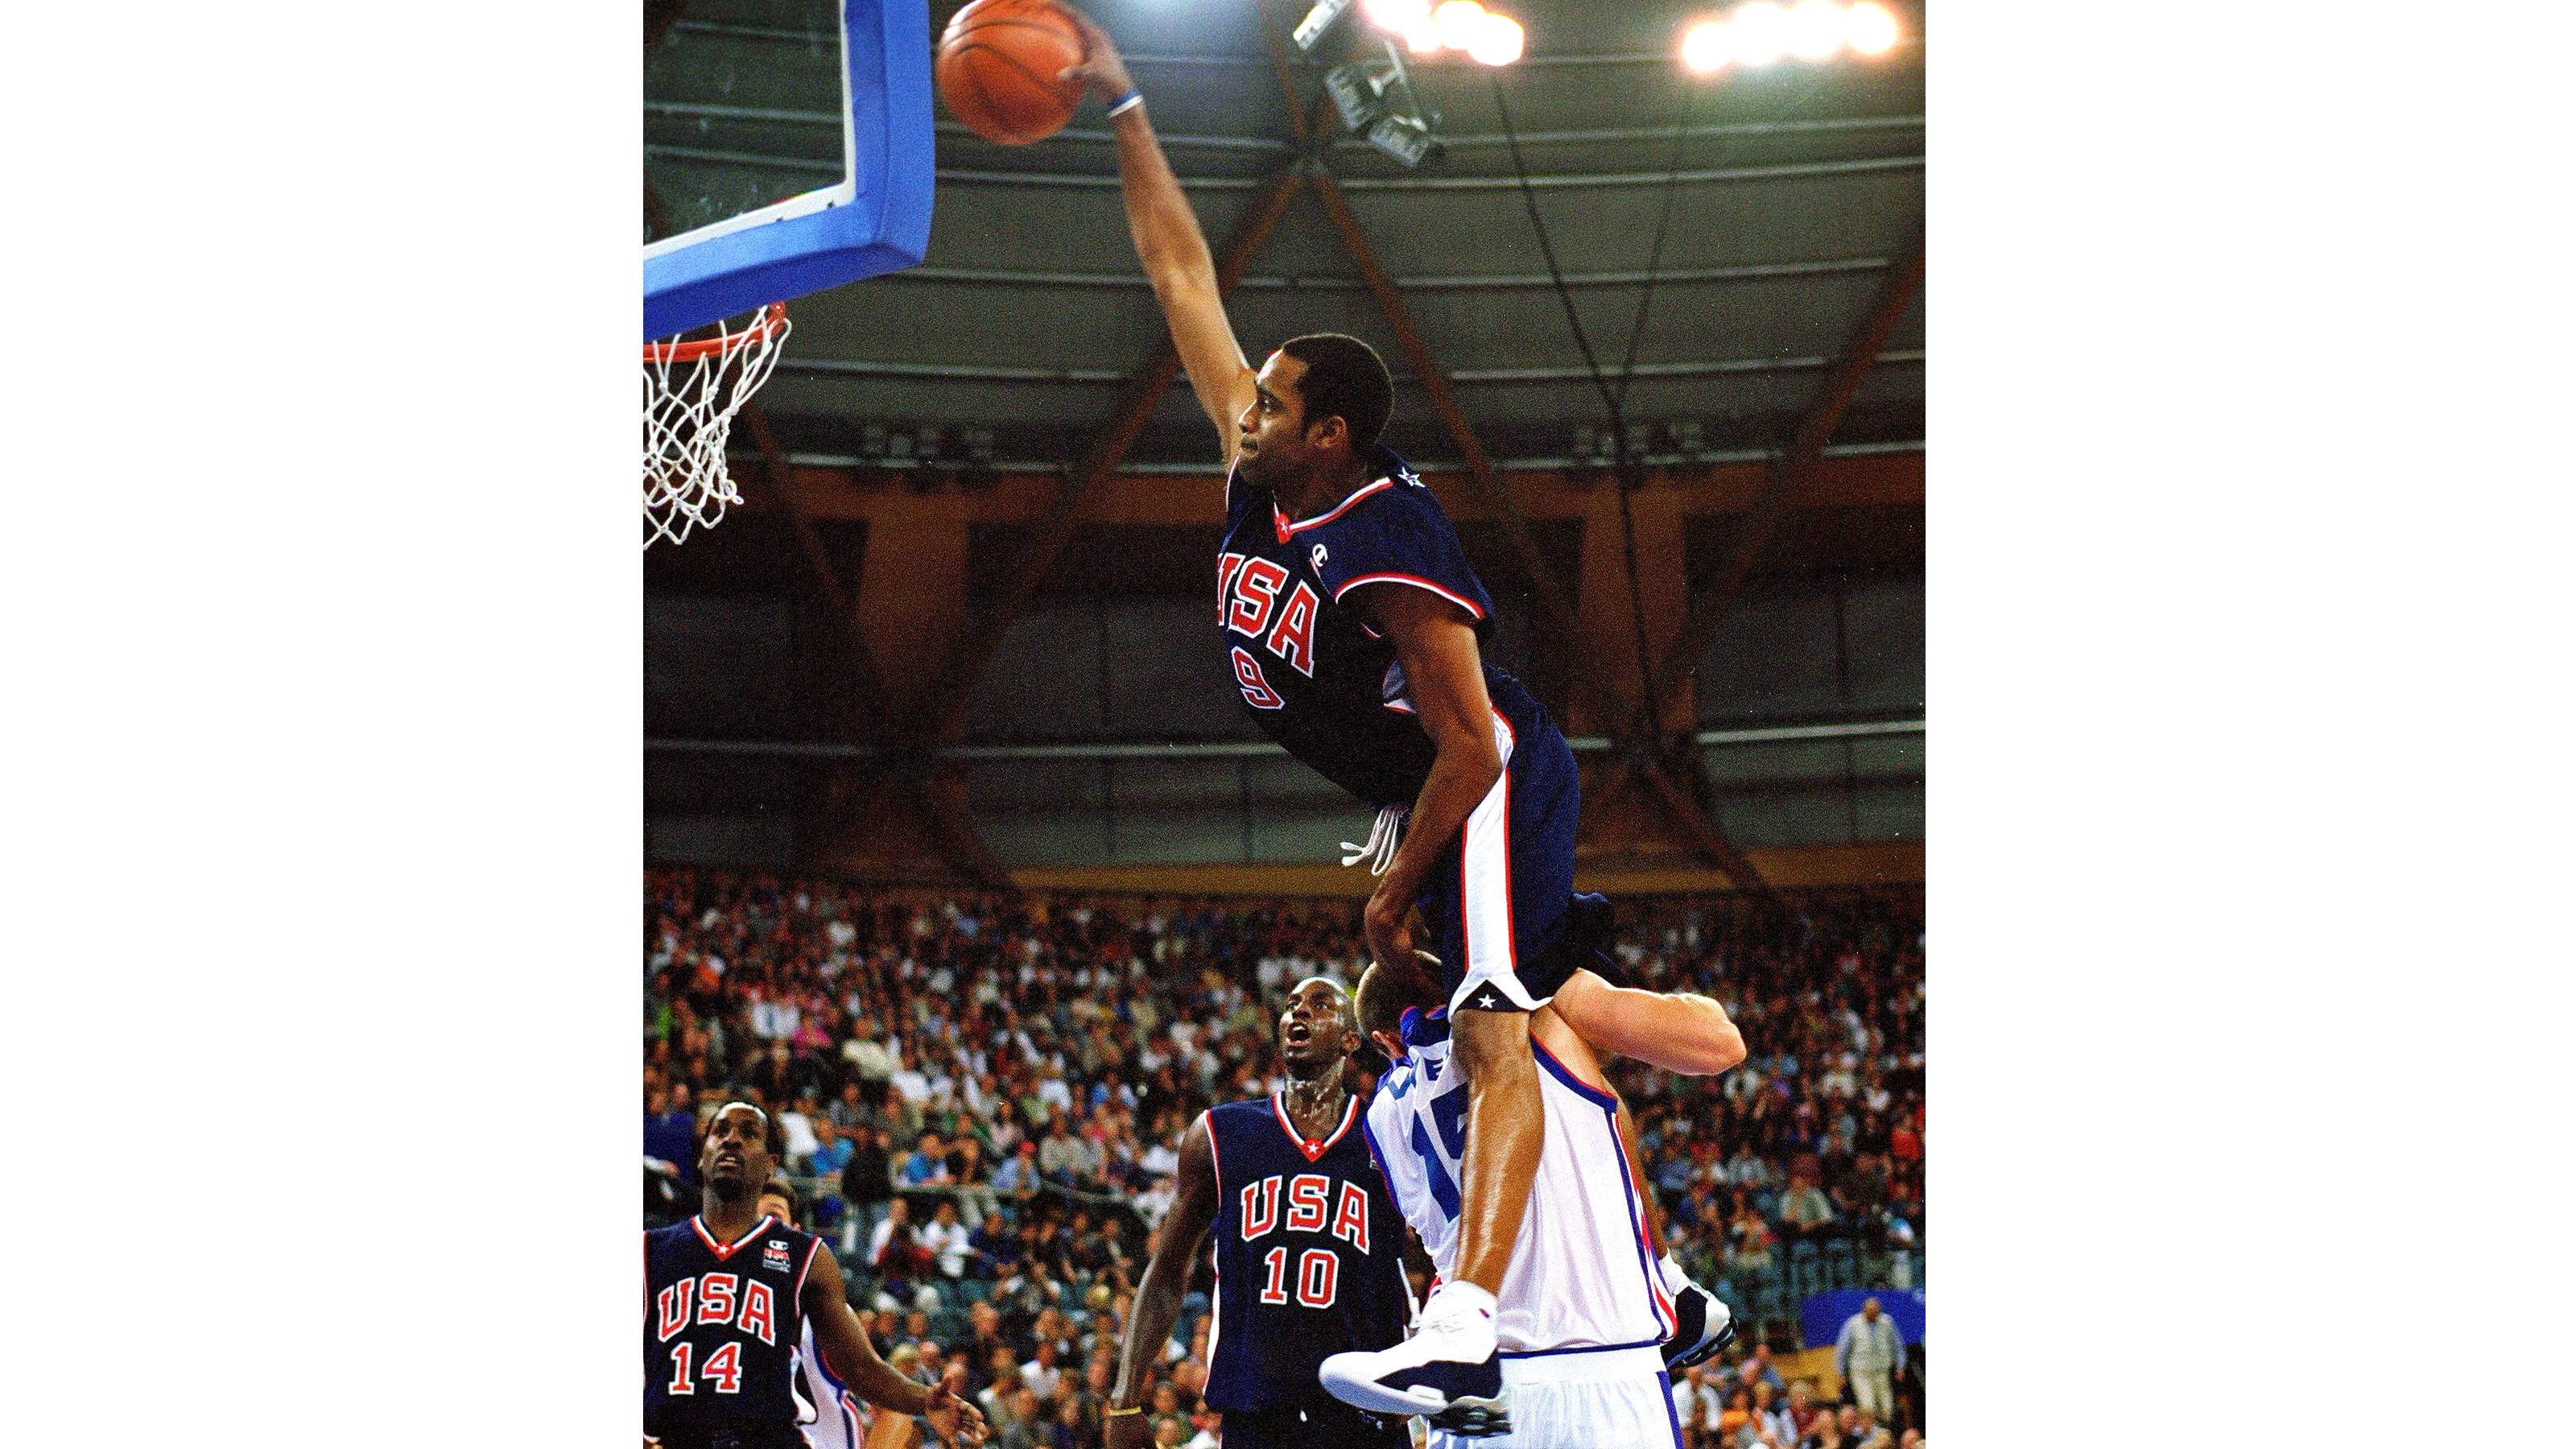 After 15 years, those who saw Vince Carter leap over Frederic Weis